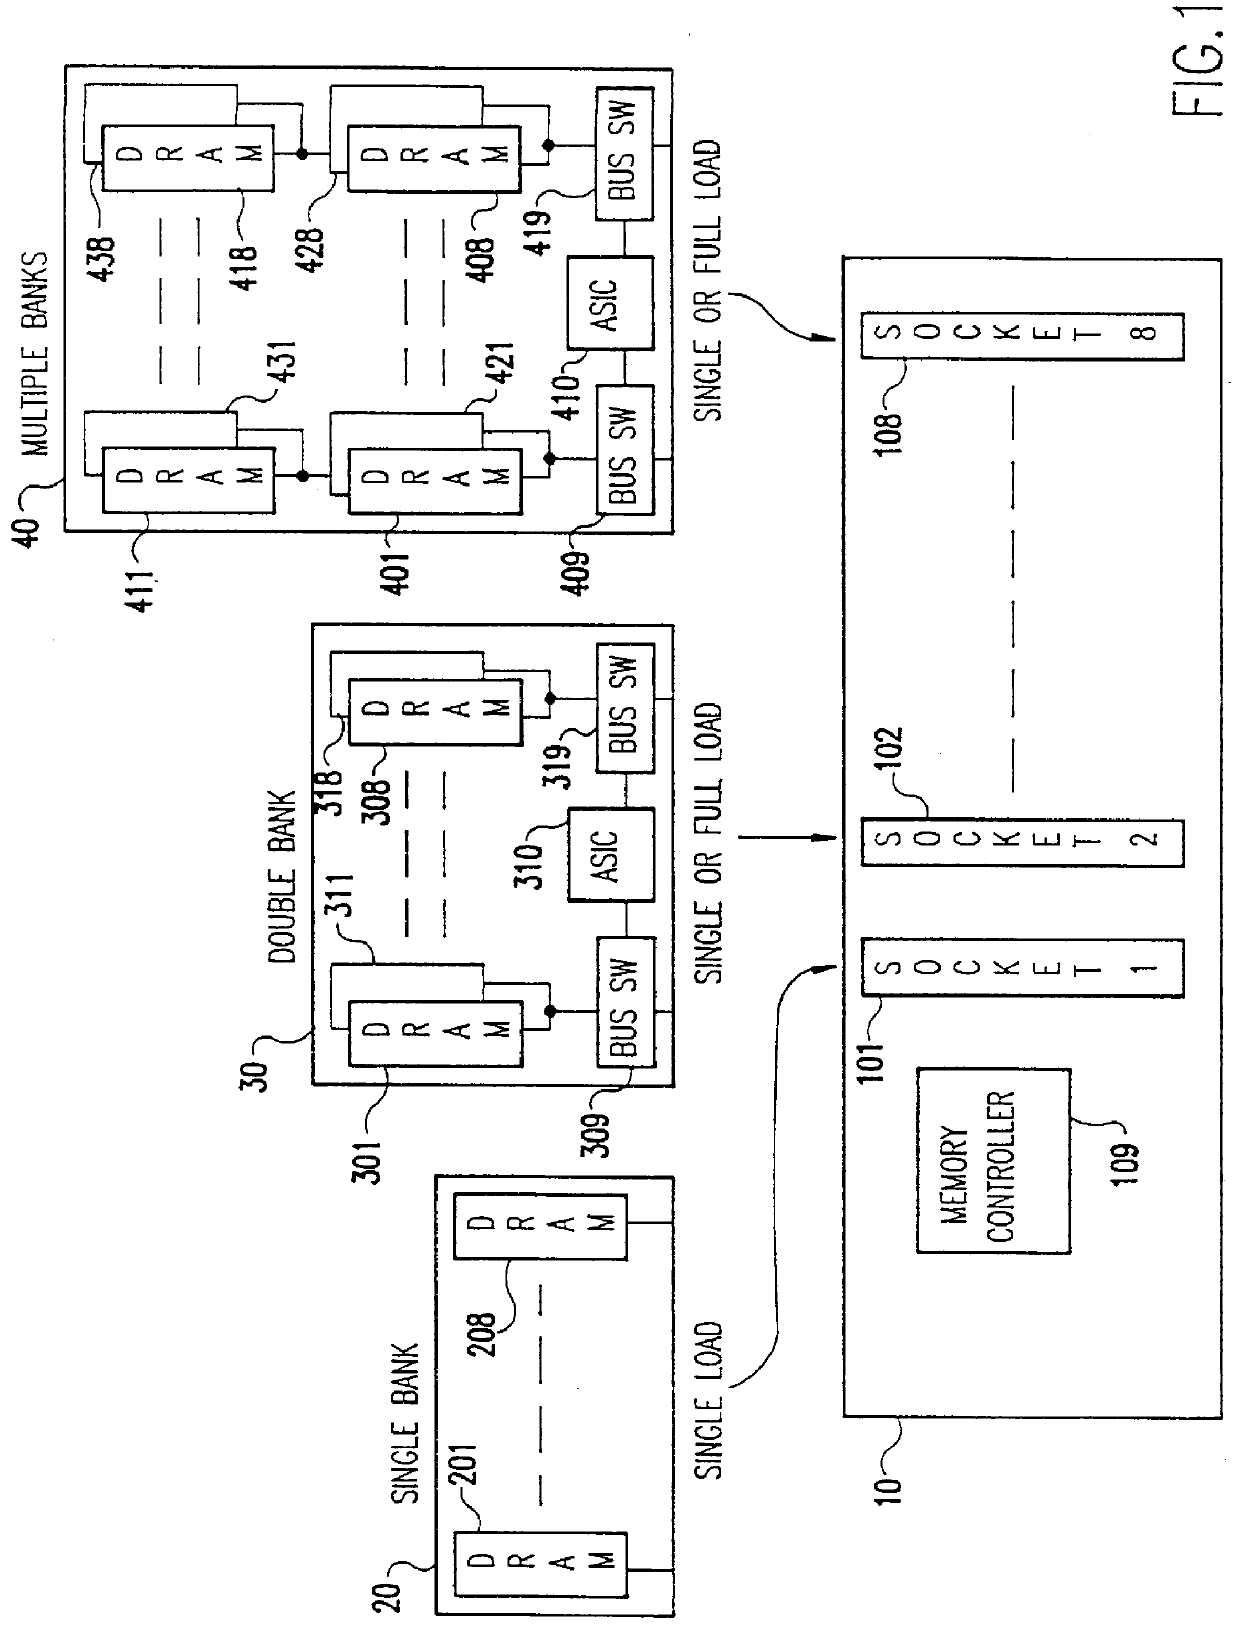 High density memory module with in-line bus switches being enabled in response to read/write selection state of connected RAM banks to improve data bus performance